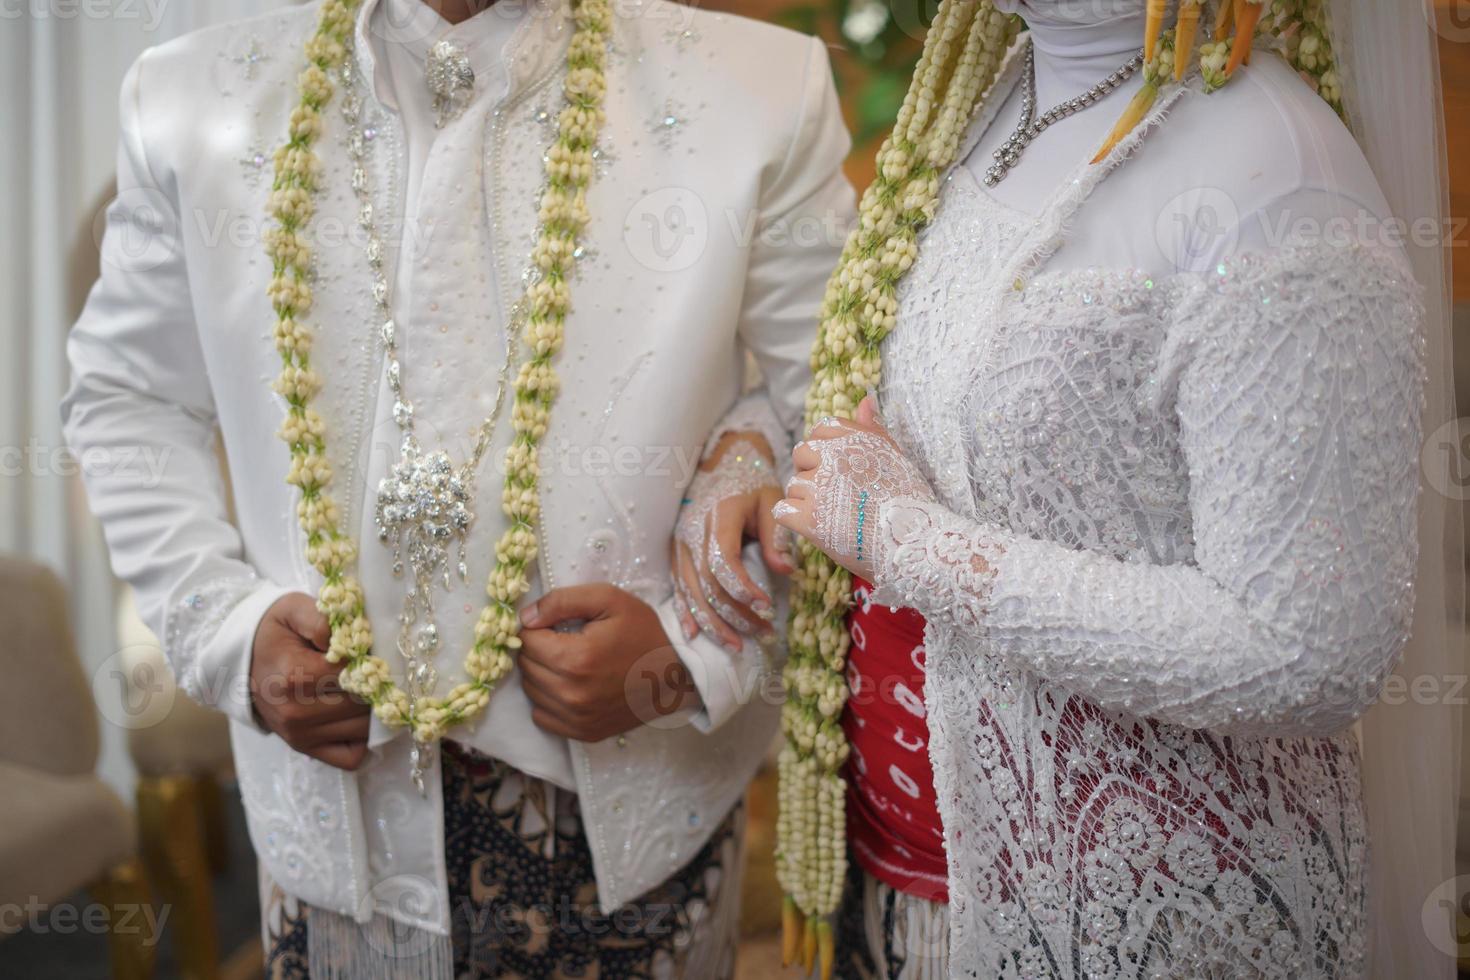 Beautiful Bride and Groom Standing while Wearing Wedding Dress with Jasmine and Magnolia Flower Necklace for a Traditional Wedding Ceremony in Indonesia photo